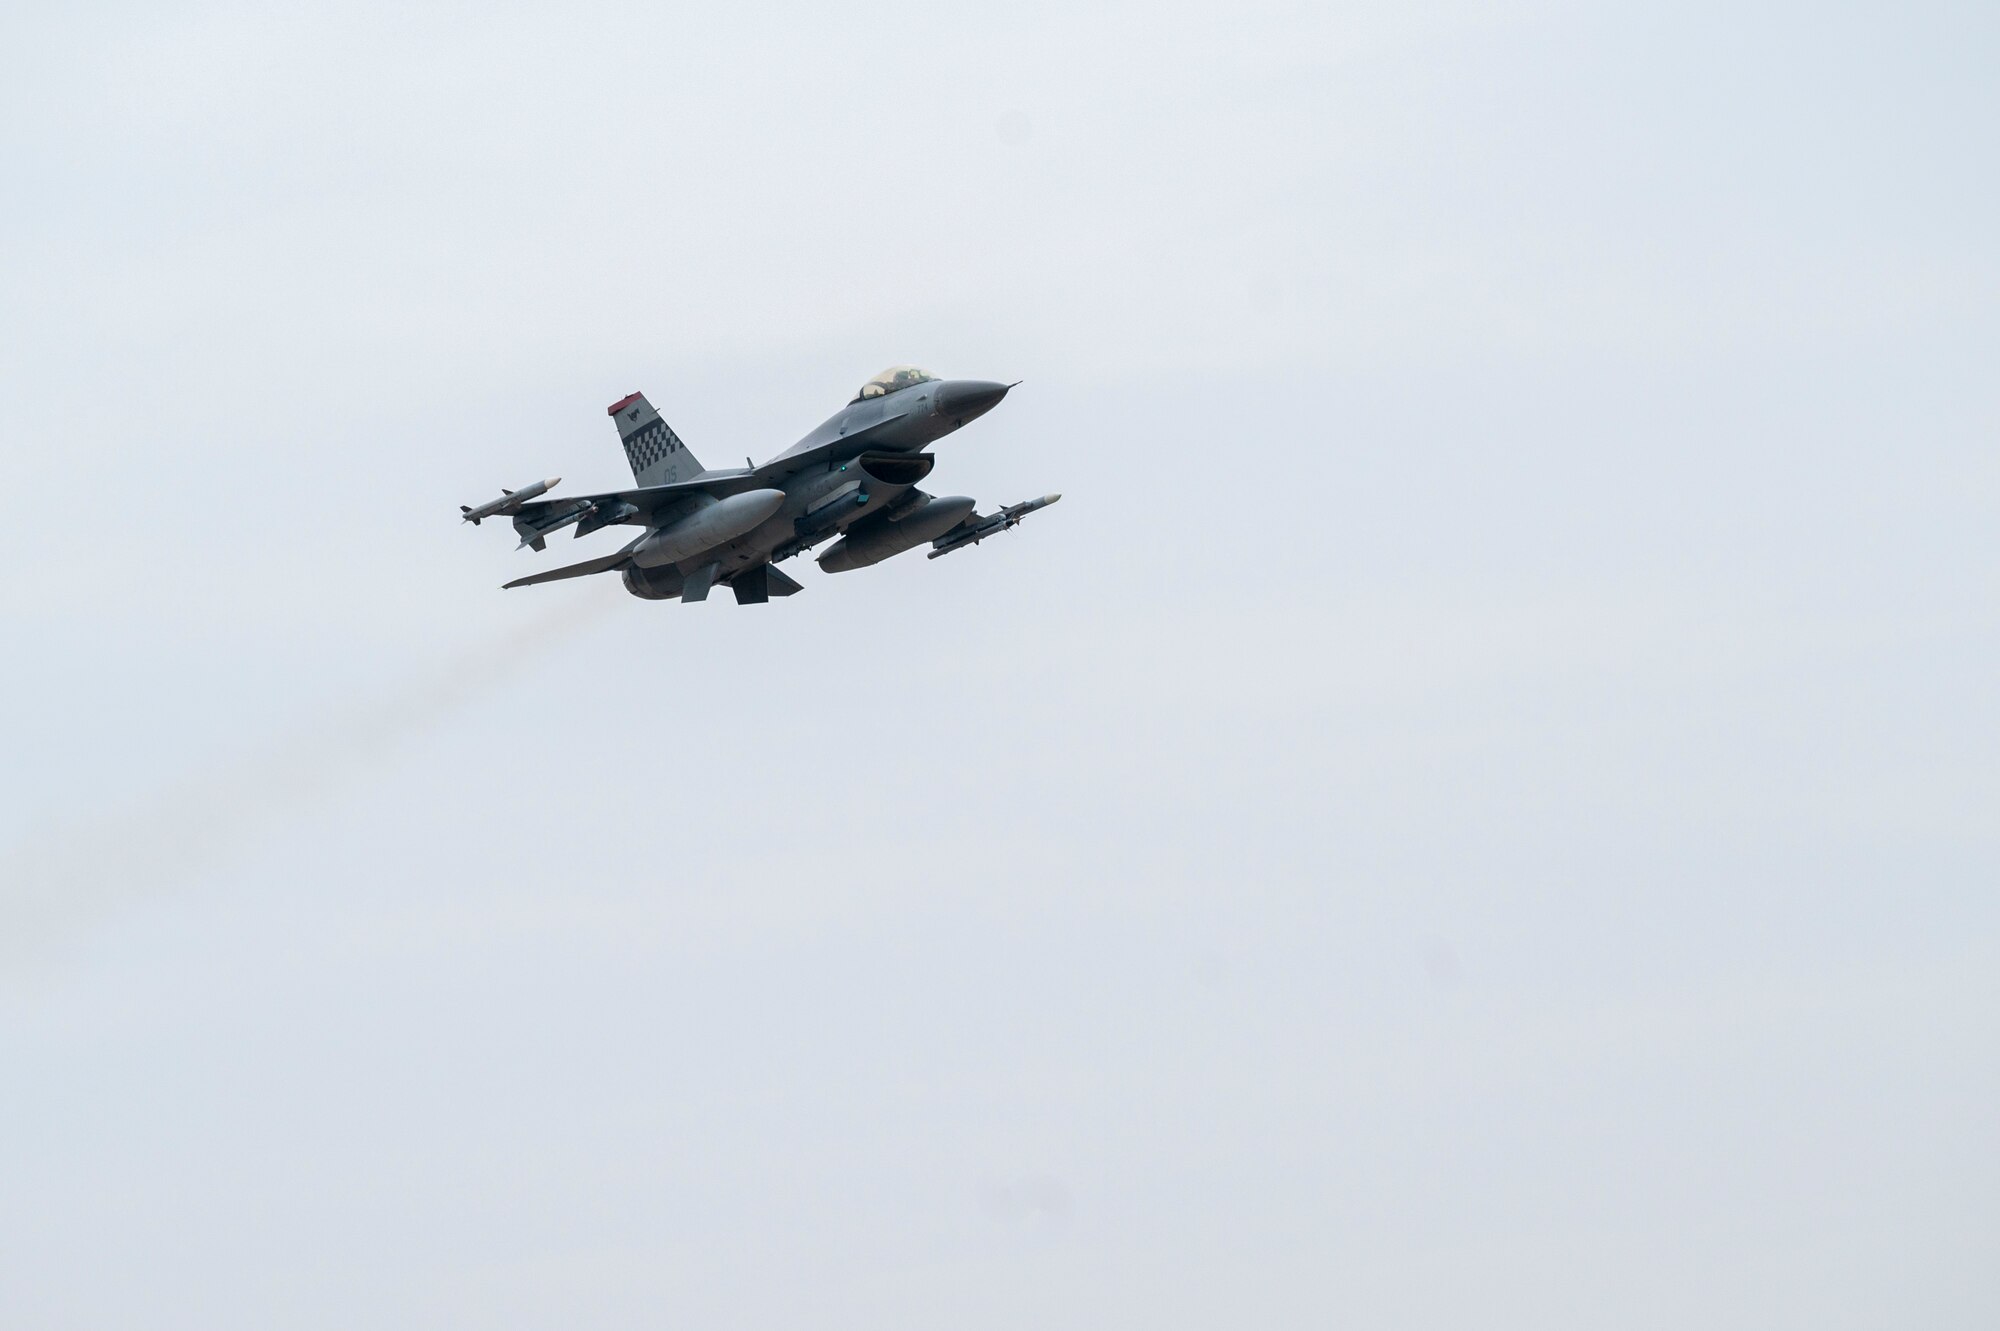 A U.S. Air Force F-16 Fighting Falcon assigned to the 36th Fighter Squadron, flies during a Buddy Squadron 24-2 training event at Osan Air Base, Republic of Korea, March 5, 2024. 
Every iteration of Buddy Squadron hones in on certain flying objectives in order to sharpen responses from USAF and ROKAF pilots in a contested scenario. The Buddy Squadron Program fosters objective-based training and improves interoperability between the U.S. and ROKAF fighter squadrons. (U.S. Air Force photo by Senior Airman Kaitlin Frazier)